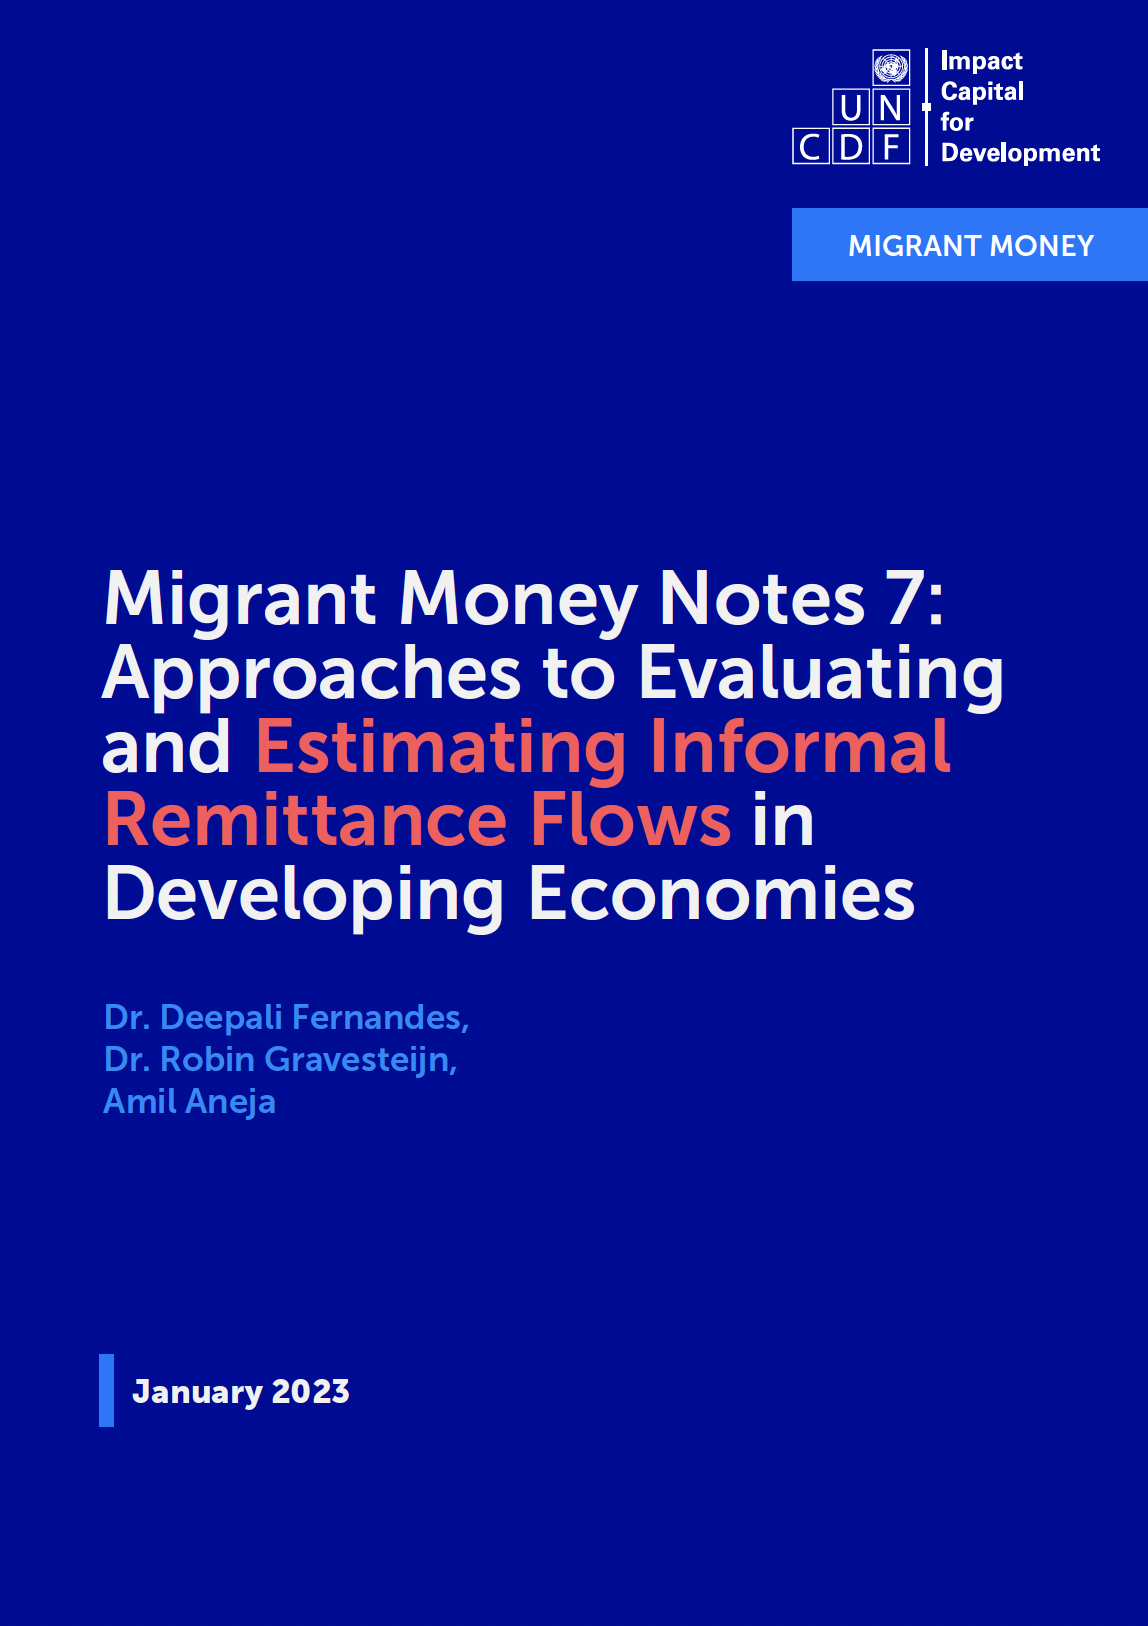 Approaches to Evaluating and Estimating Informal Remittance Flows in Developing Economies